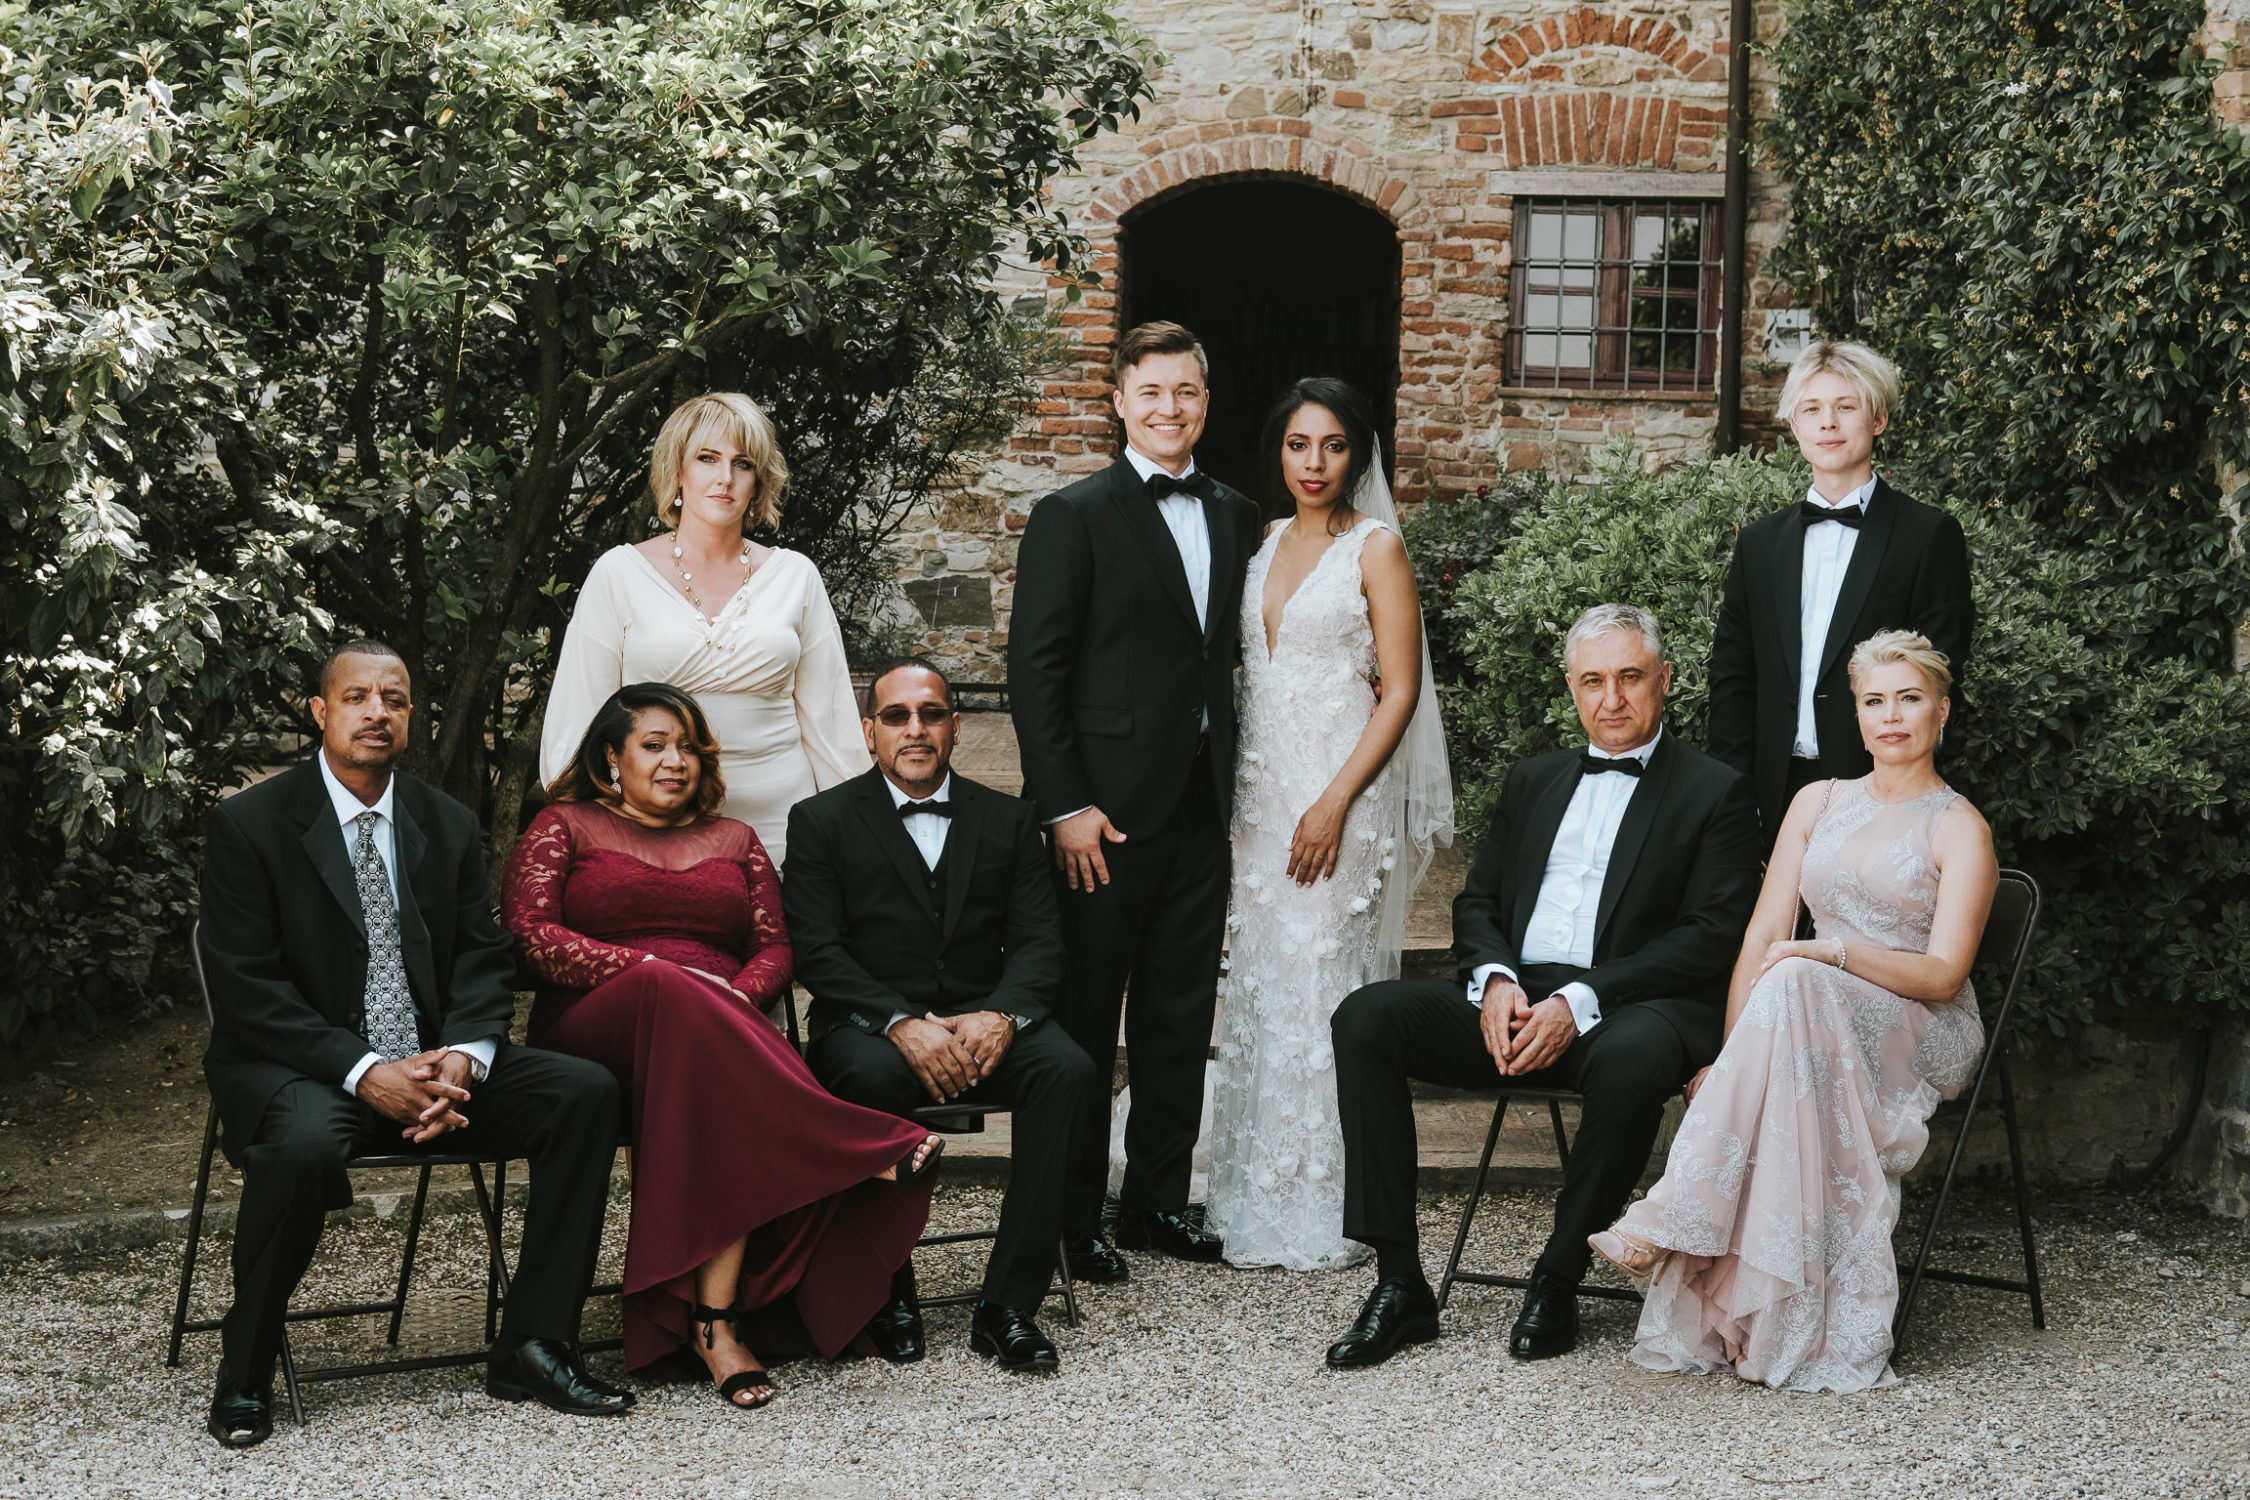 editorial family portrait at wedding